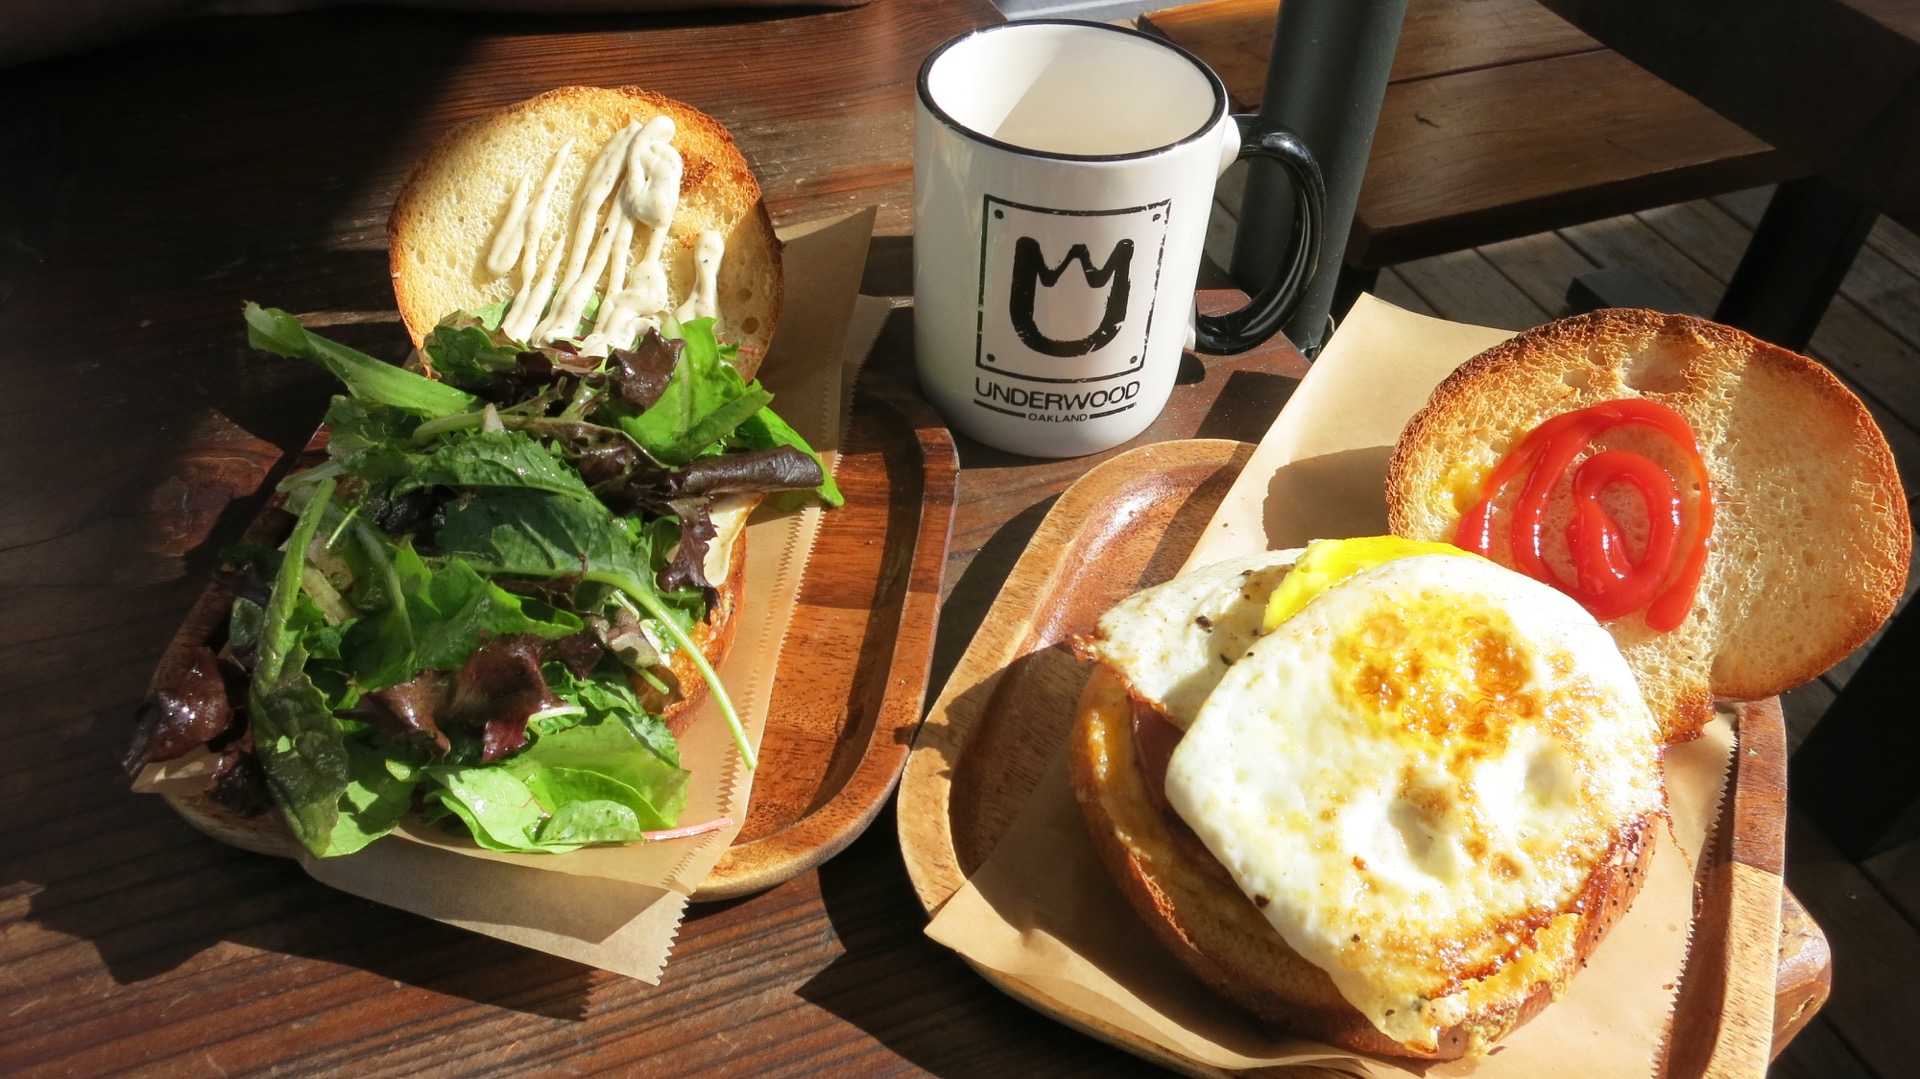 The Yoakland and Jersey Breakfast sandwiches from Oakland's Cafe Underwood are inspired takes on what you'd find in delis in the tri-state area.